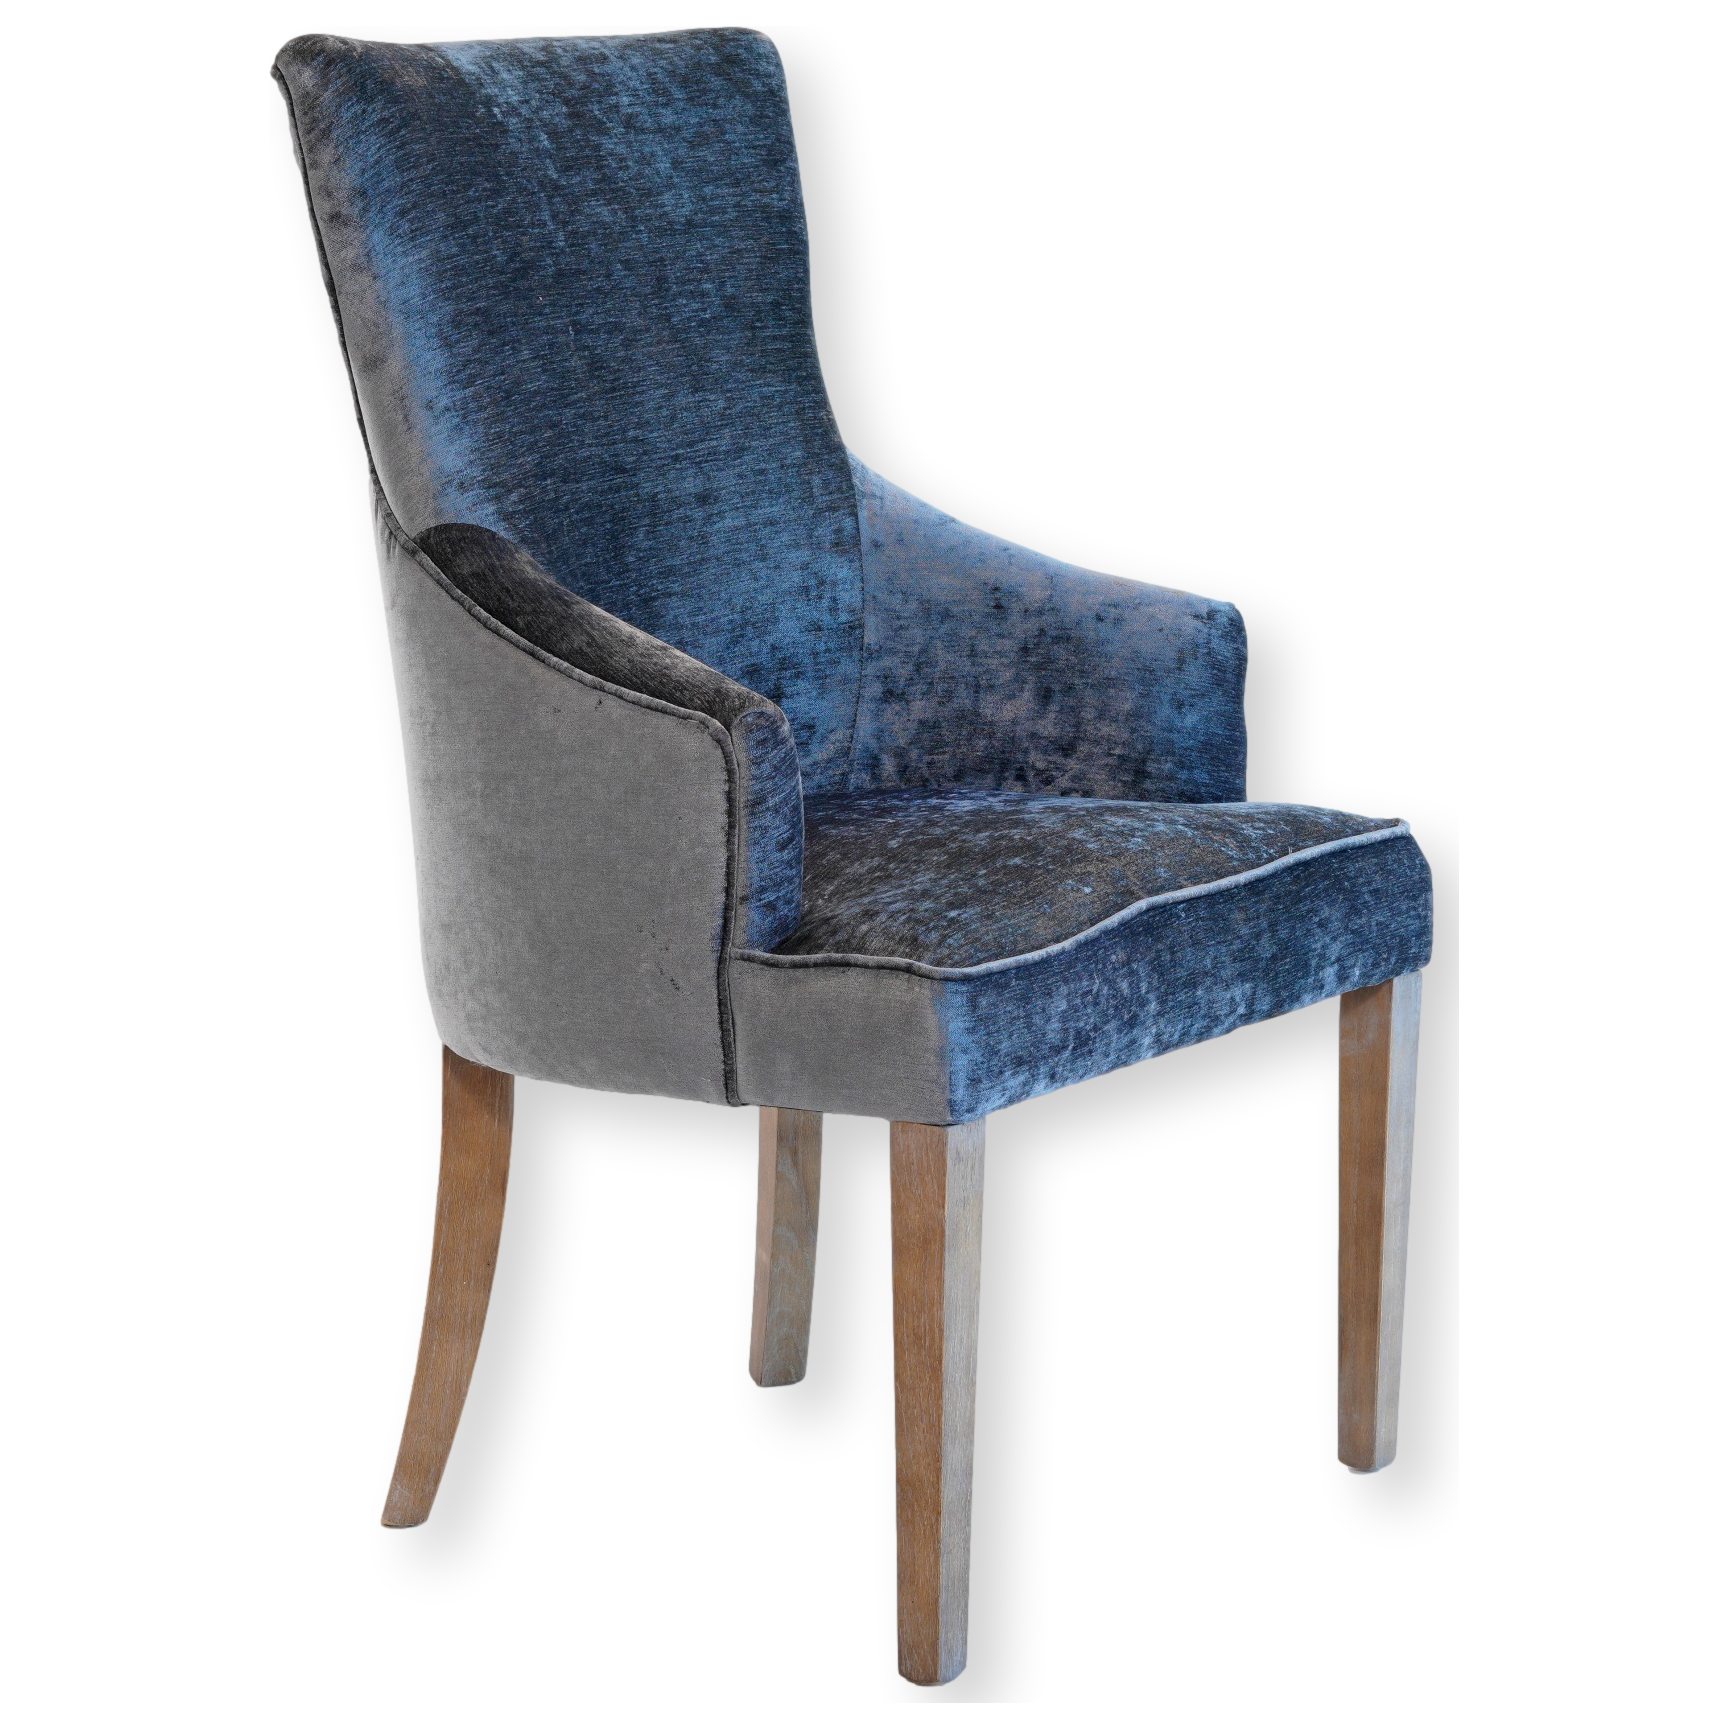 An elegant High Back Dining Chair with wooden legs and dual-toned upholstery; front in rich blue velvet and the sides and back in a contrasting dark gray fabric. The captain's chair has a high back and armrests.